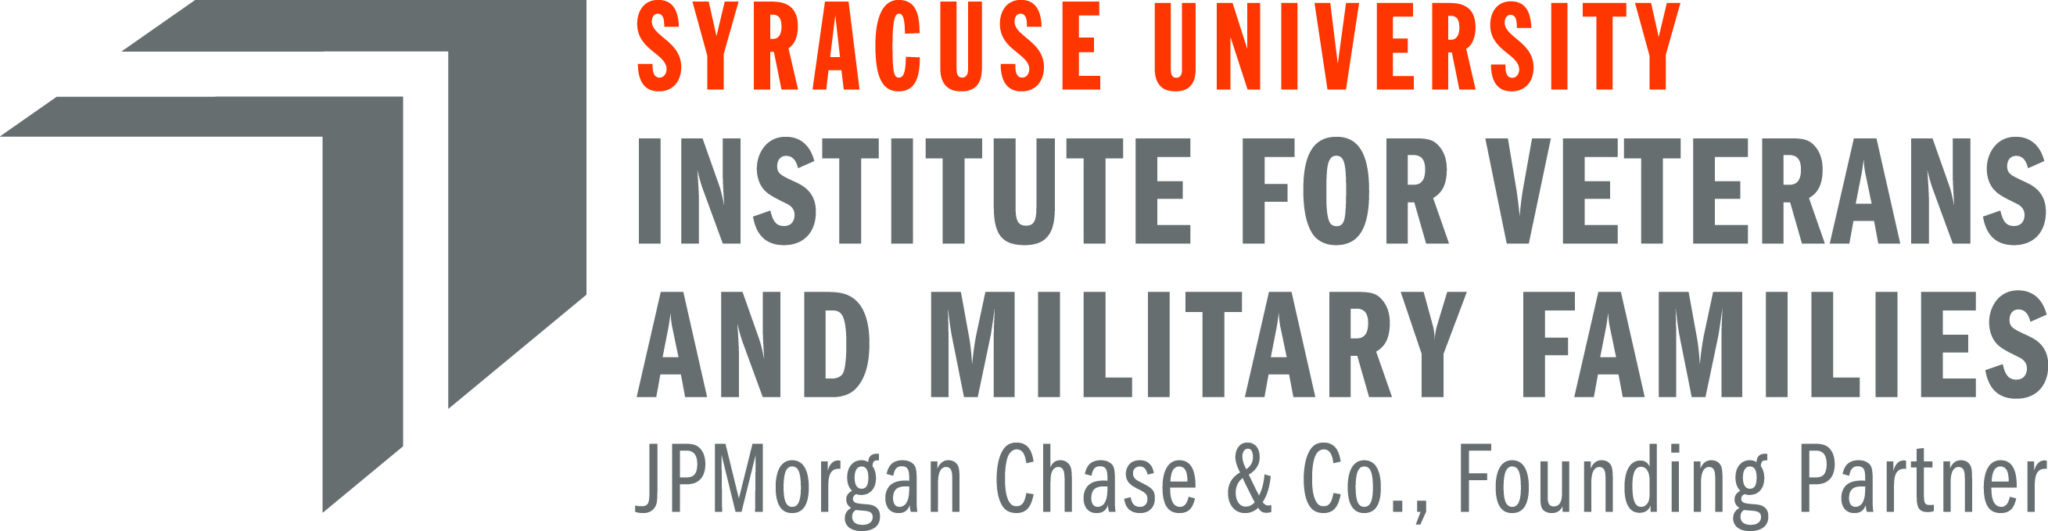 Institute for Veterans and Military Families logo